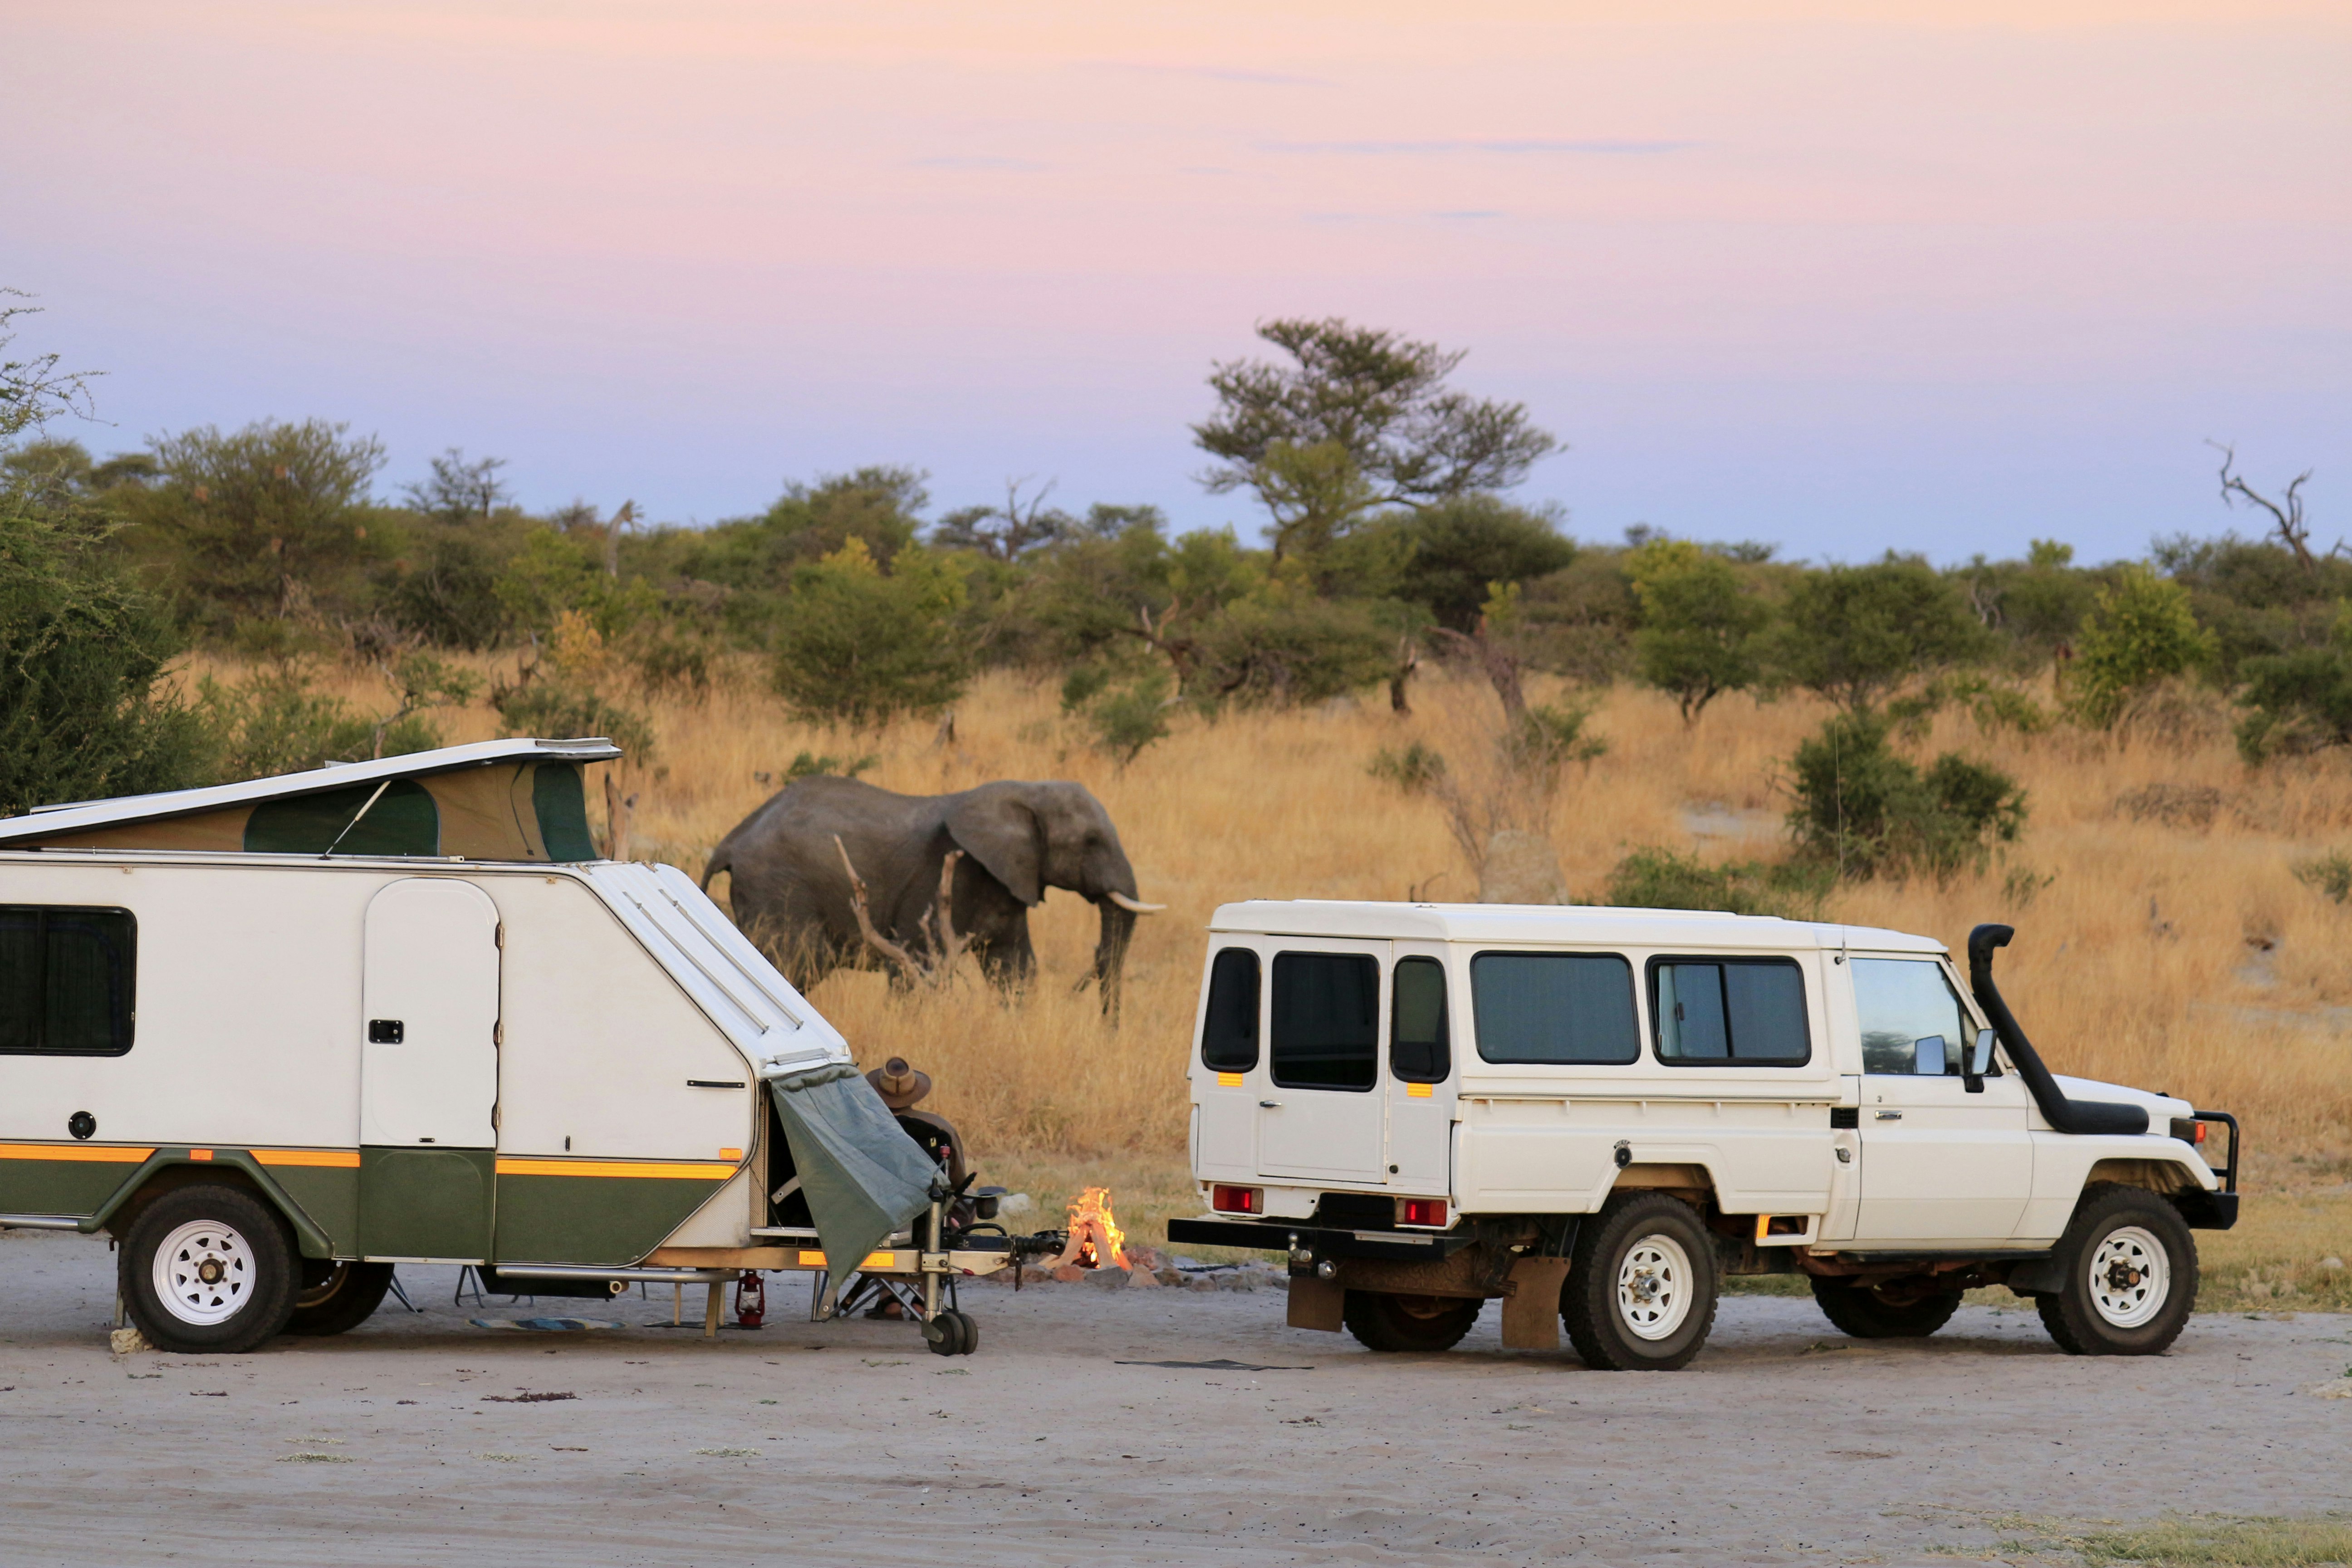 Camping in Botswana's Elephant Sands campsite always promises great elephant sightings up-close and within reach of any lens length